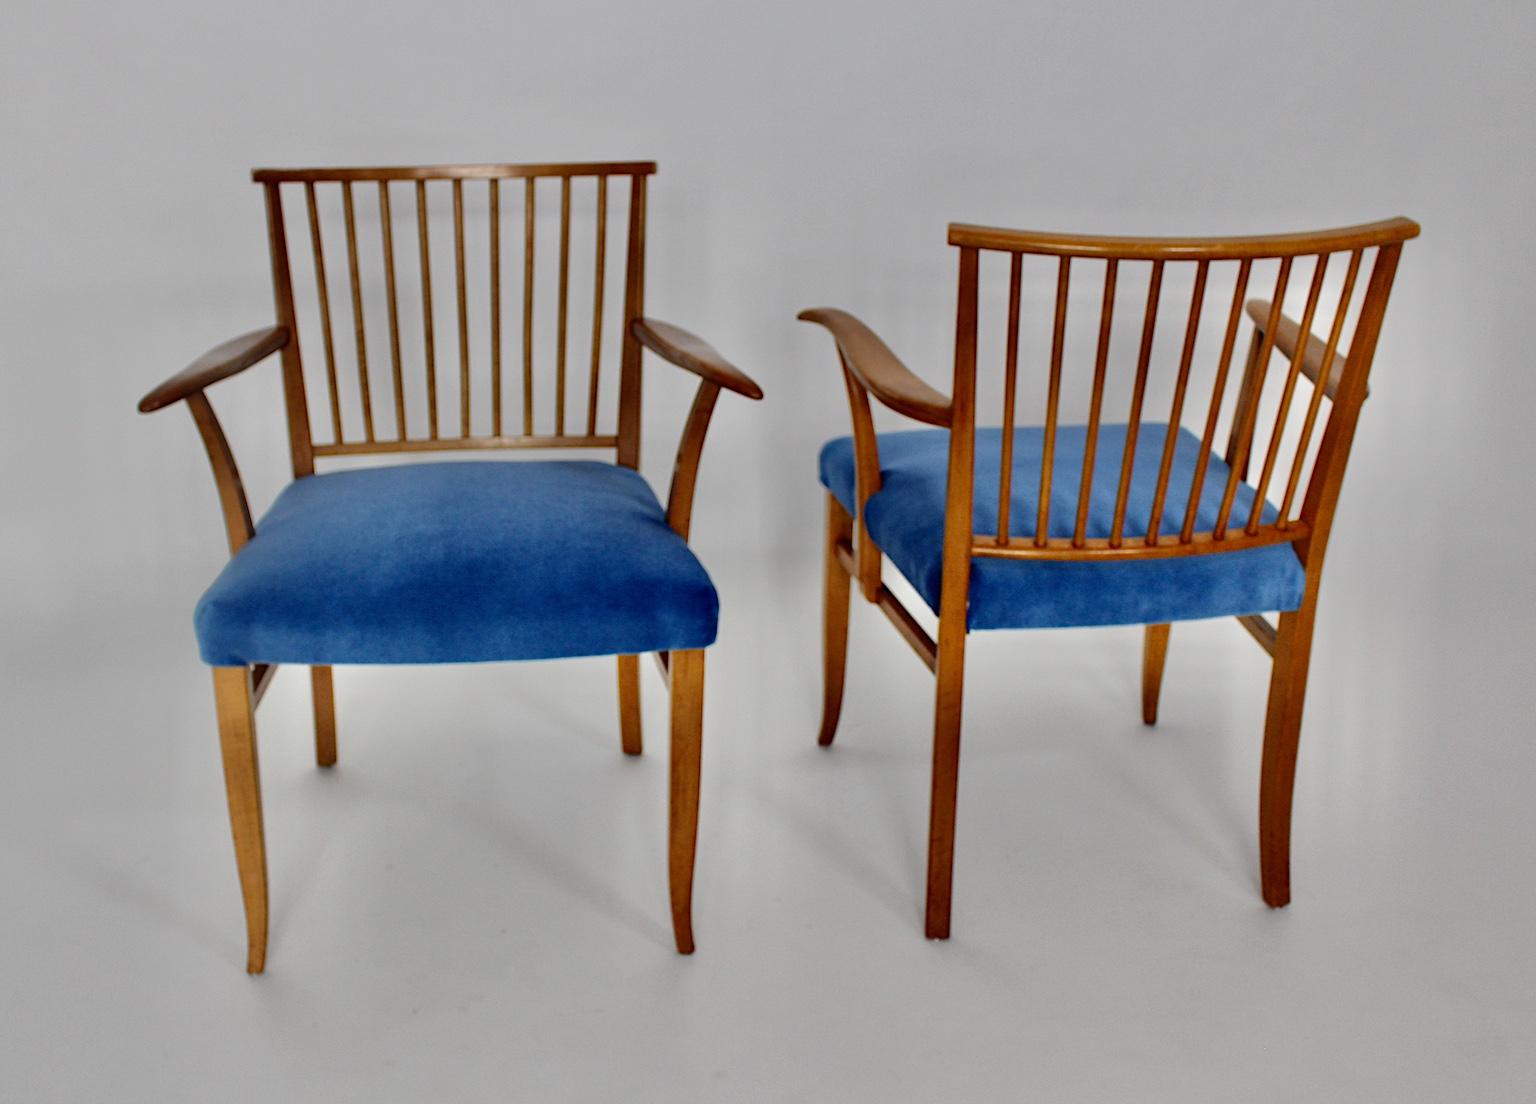 Art Deco pair of vintage cherrywood armchairs or chairs attributed to Josef Frank, which were designed and made in Vienna circa 1927.
The spoke back shows an elegant surface, while the slightly curved armrests flow into the back. Also the armrests